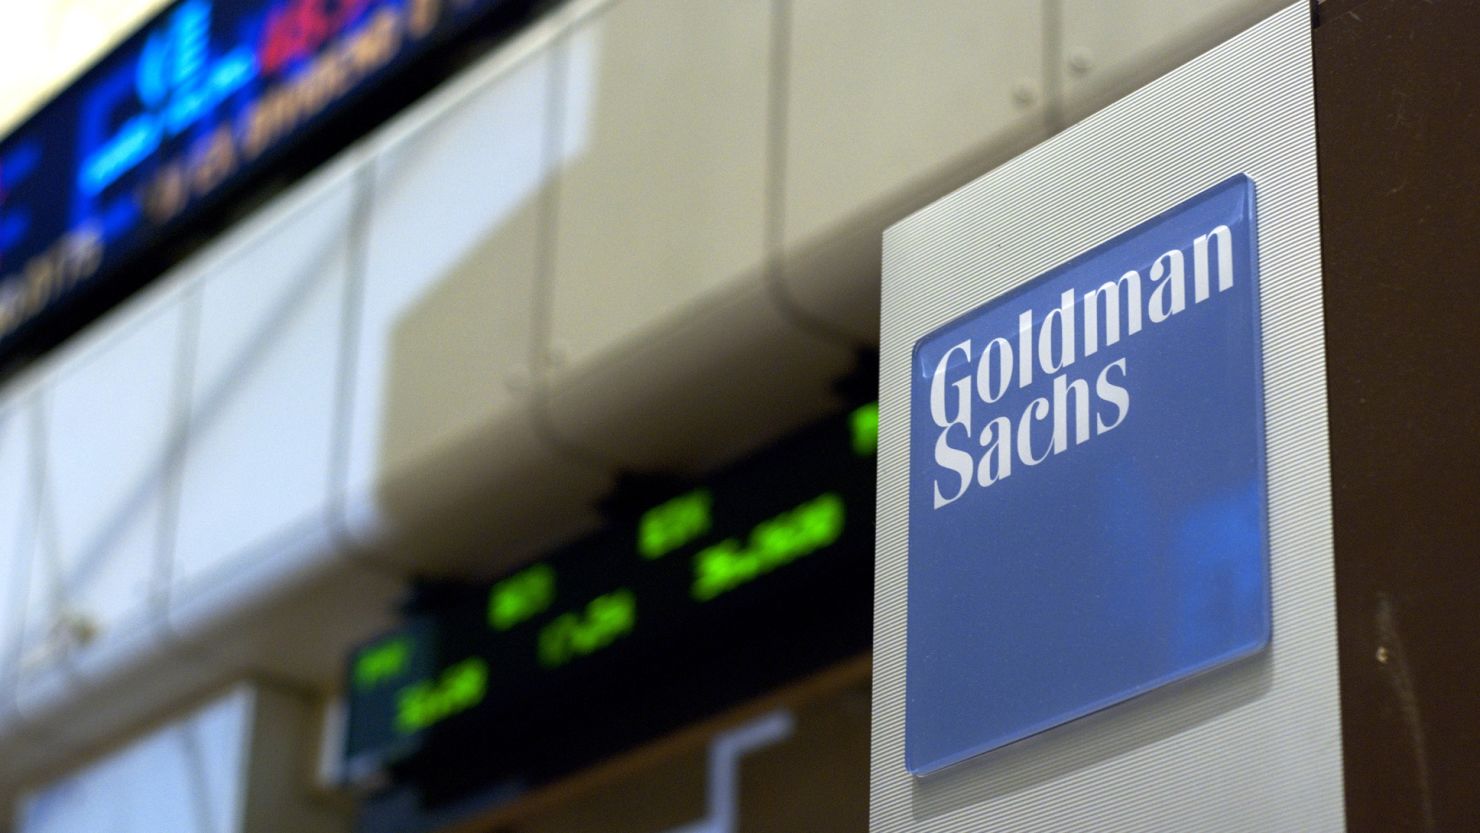 Goldman's approach mirrors its recent opportunistic move in the US to release bonuses to staff on December 31.